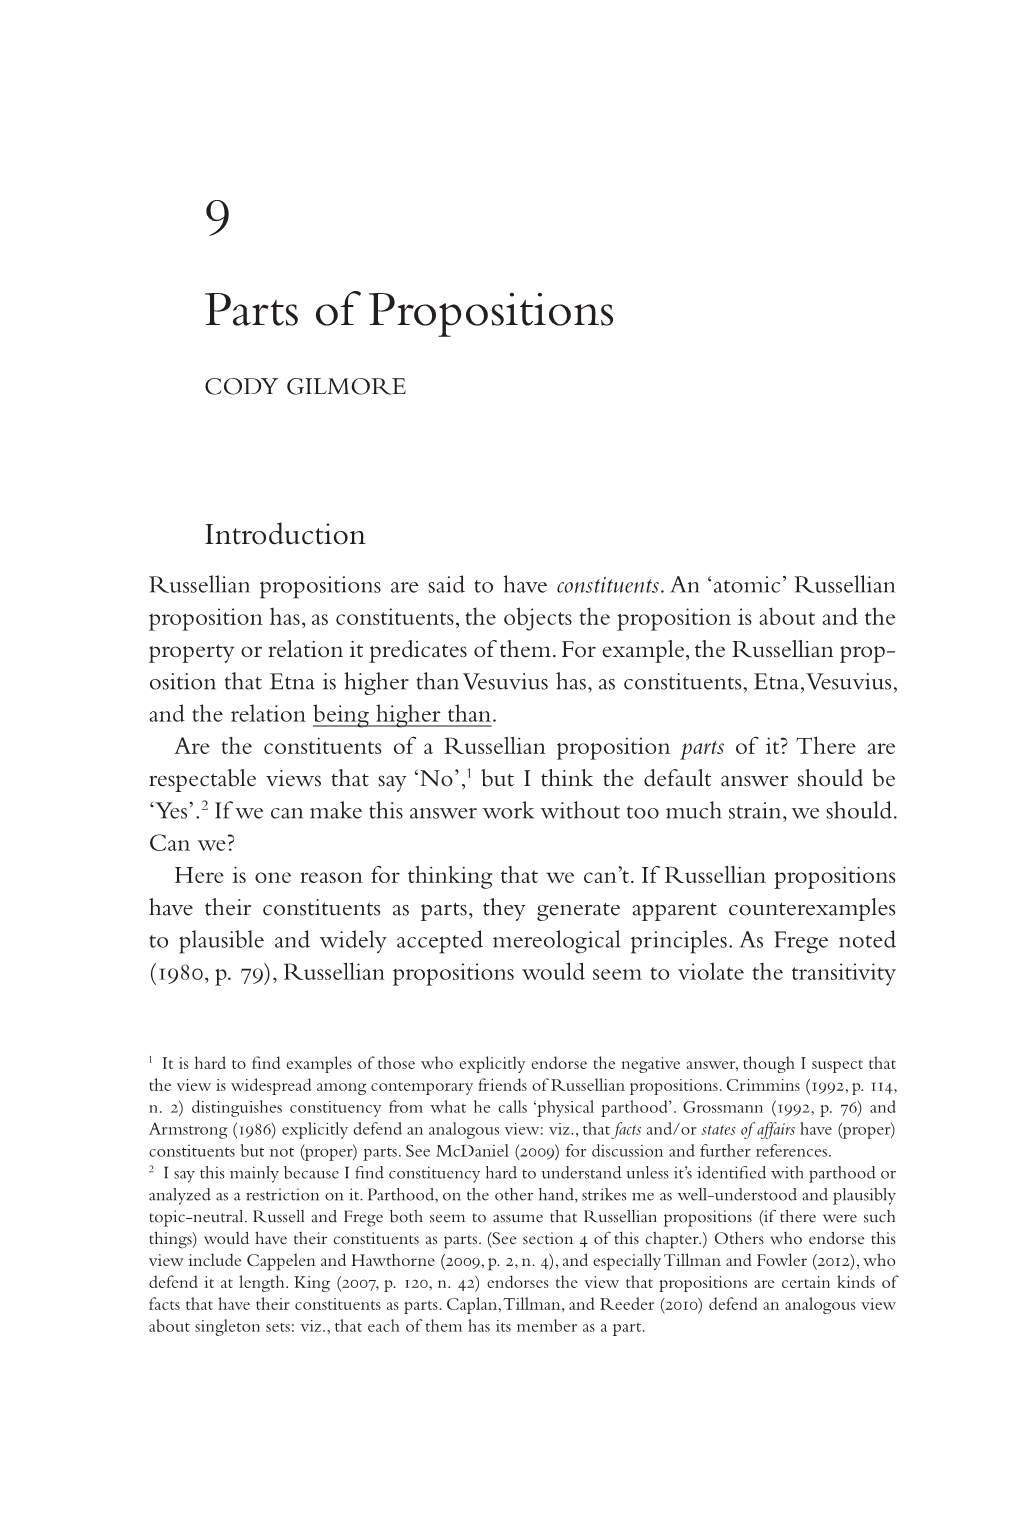 Parts of Propositions